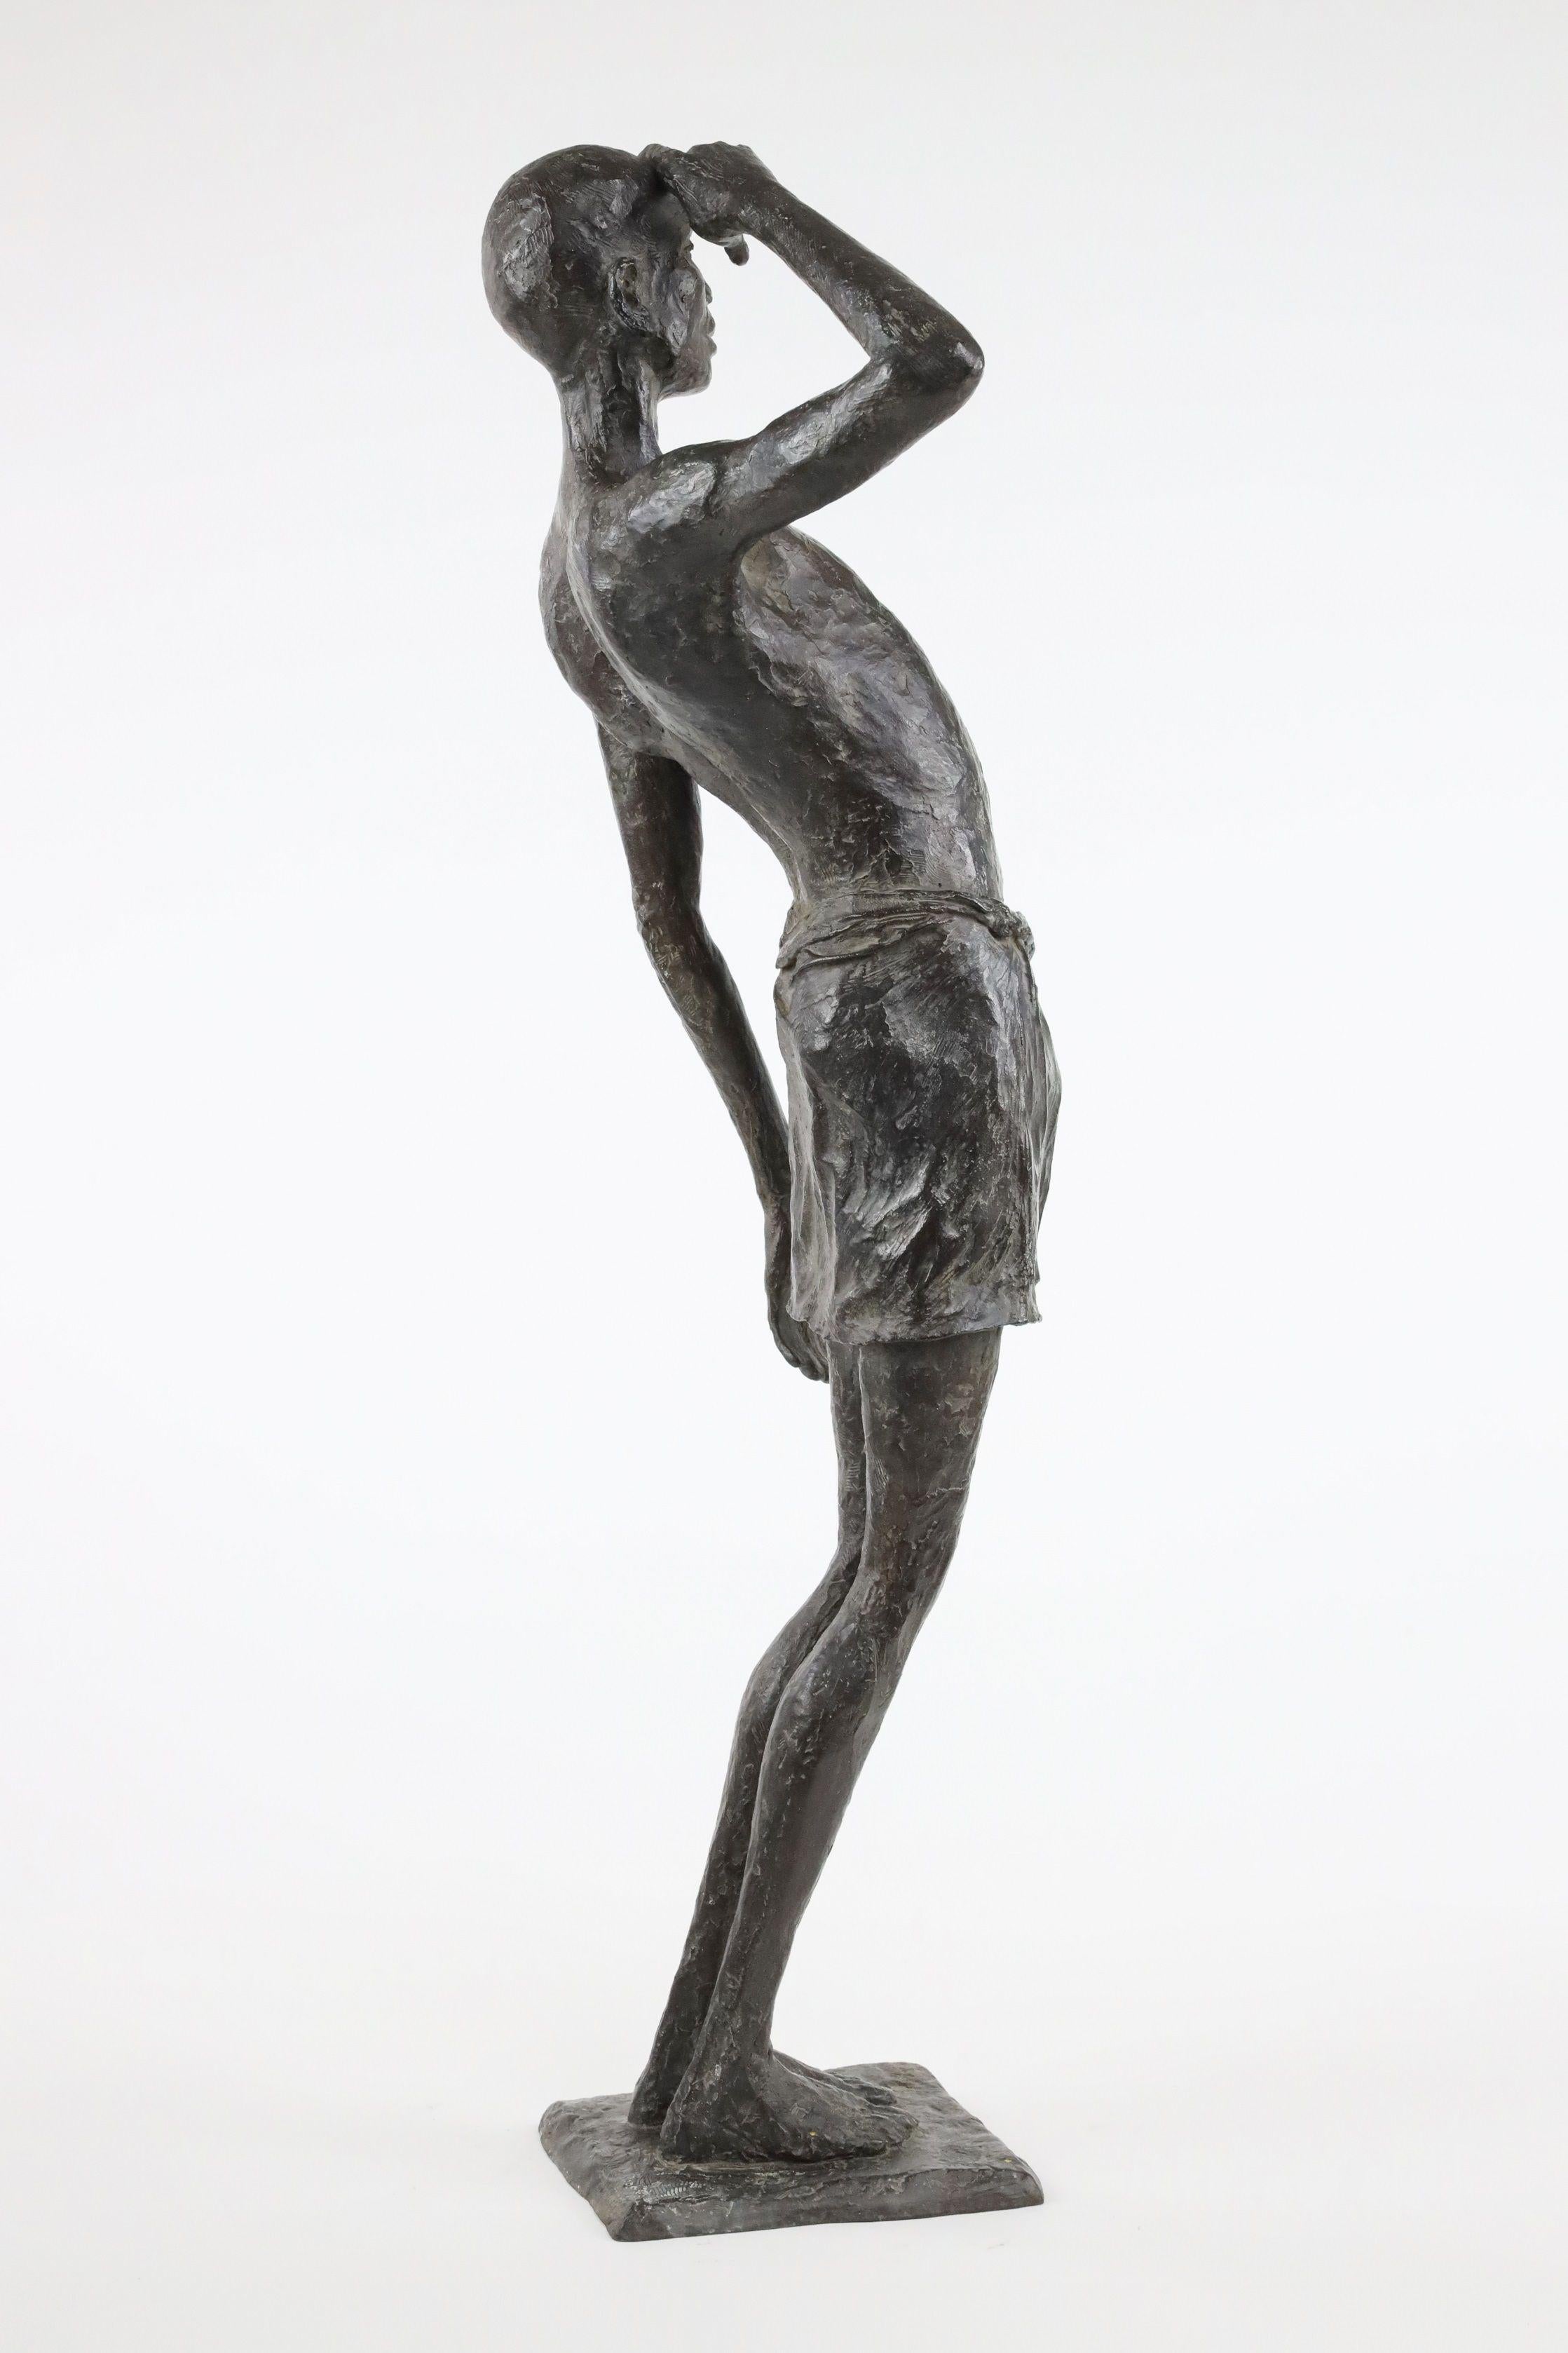 The Waiting Time by Marine de Soos - Bronze sculpture, standing figure, man For Sale 3